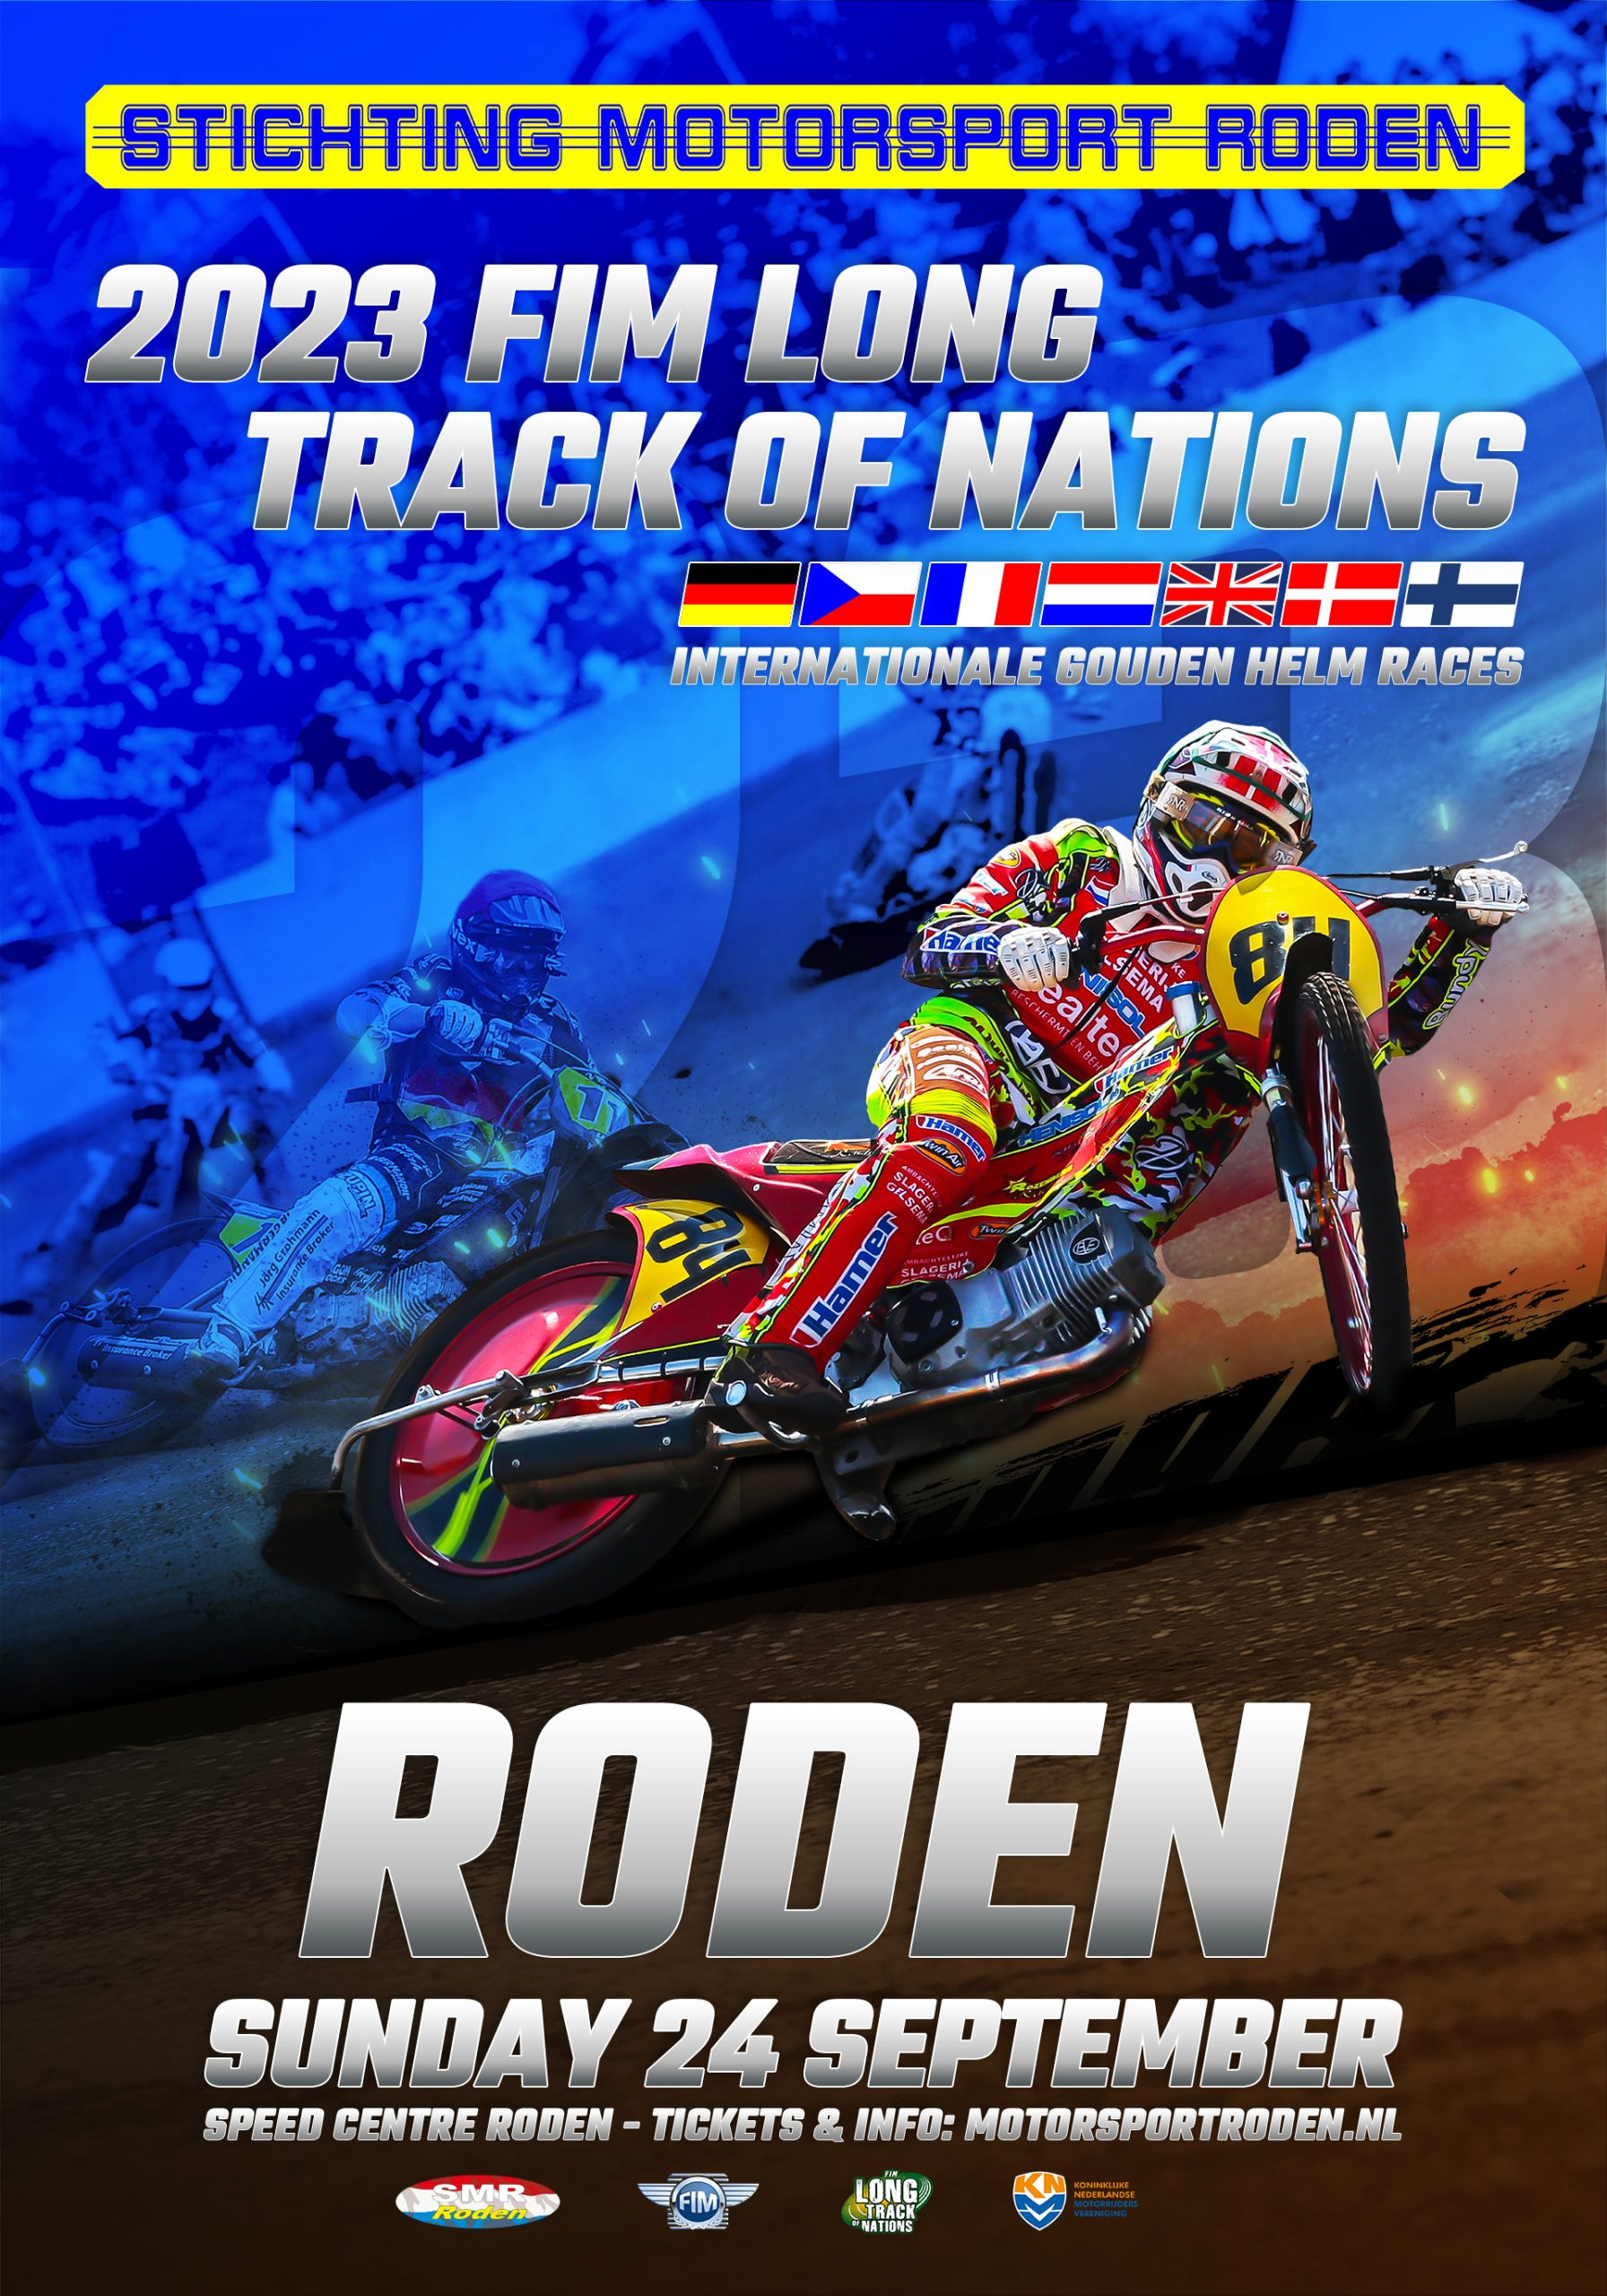 FIM Longtrack of Nations